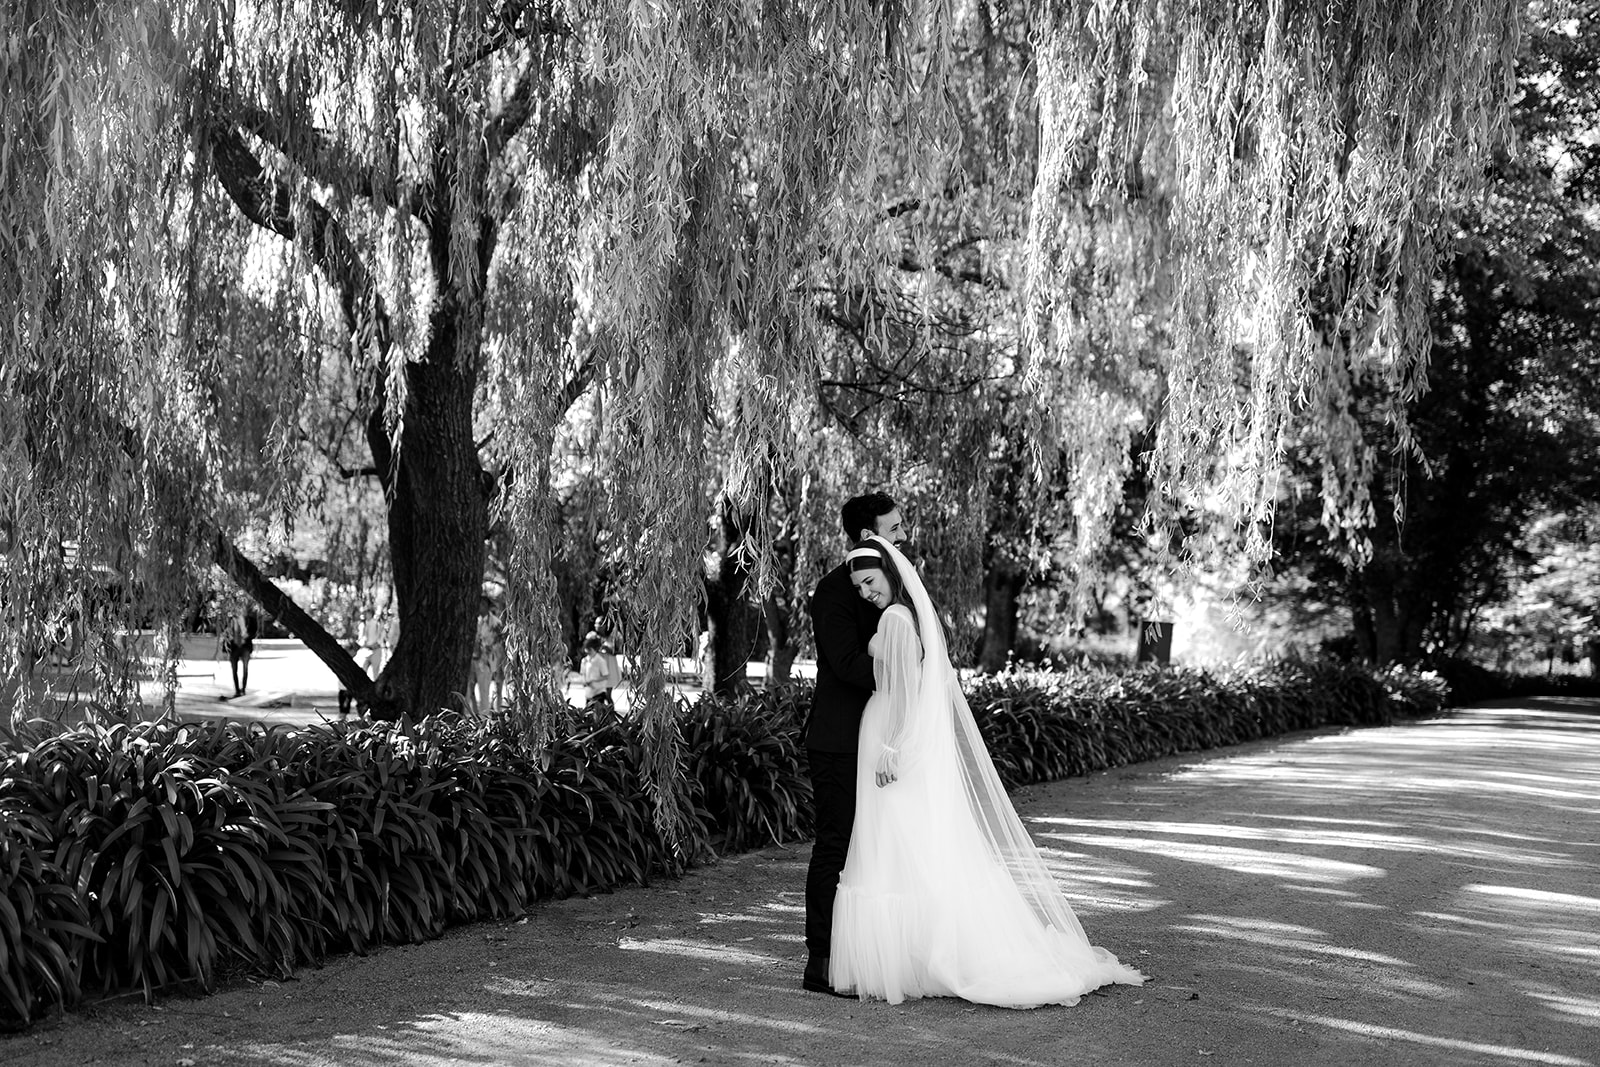 Portrait of bride & groom dancing in an English-inspired garden during their elegant country wedding.